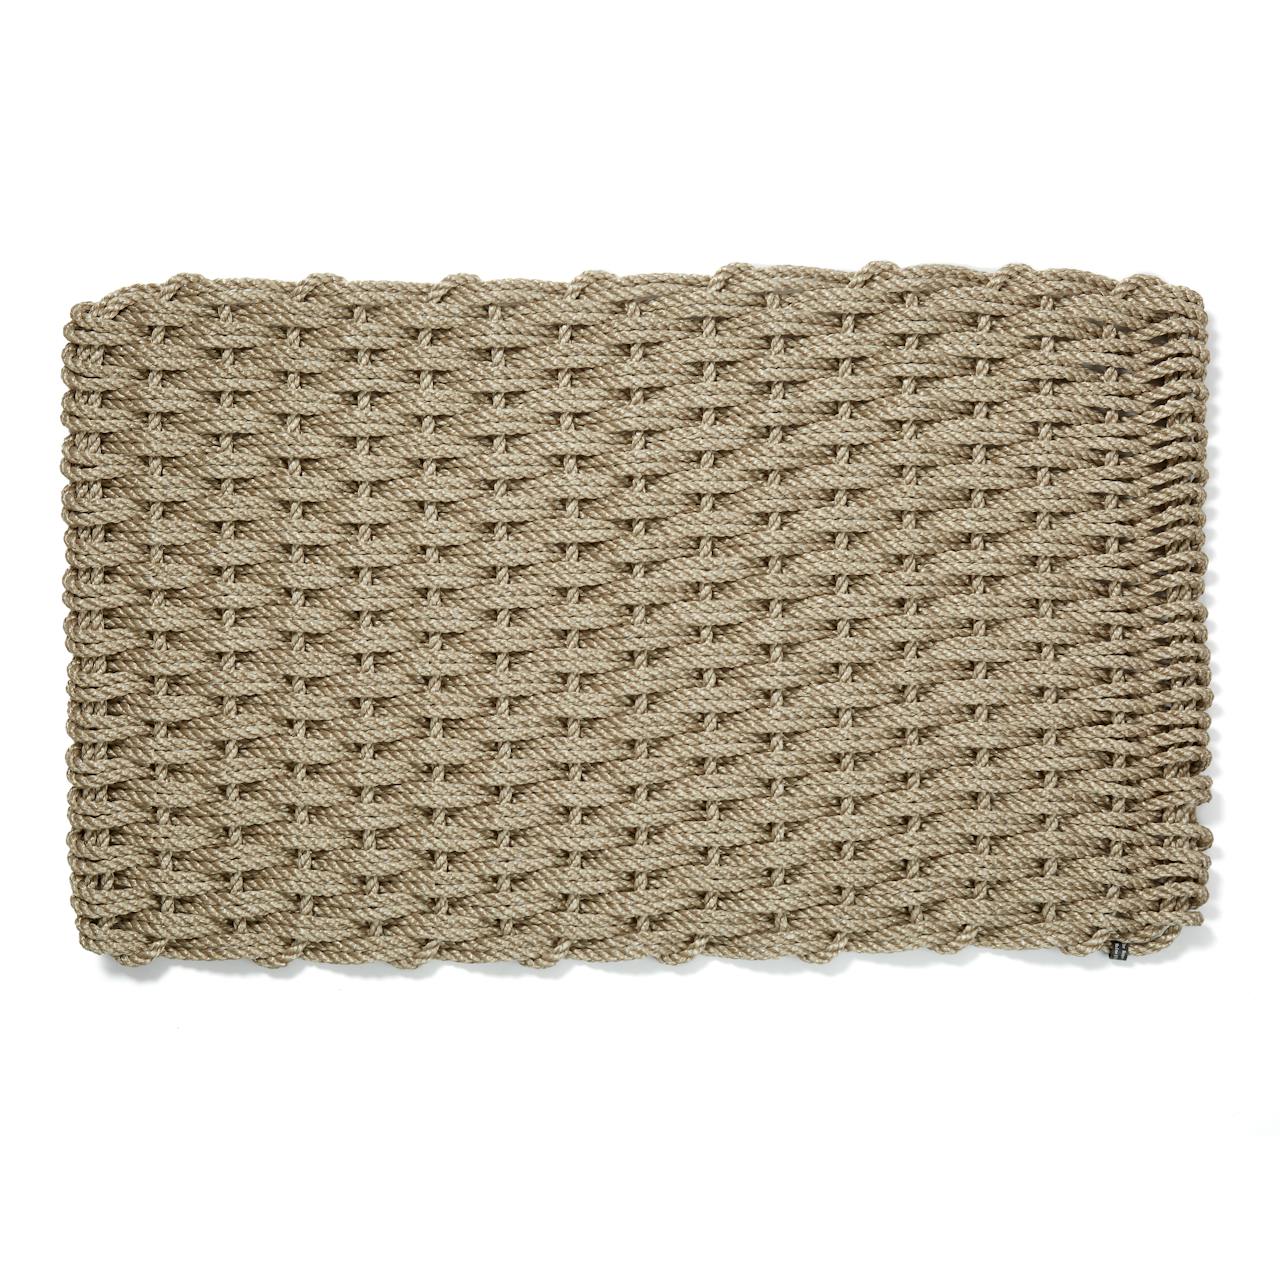 The Rope Co. Hand Woven Lobster Rope Doormat - Standard